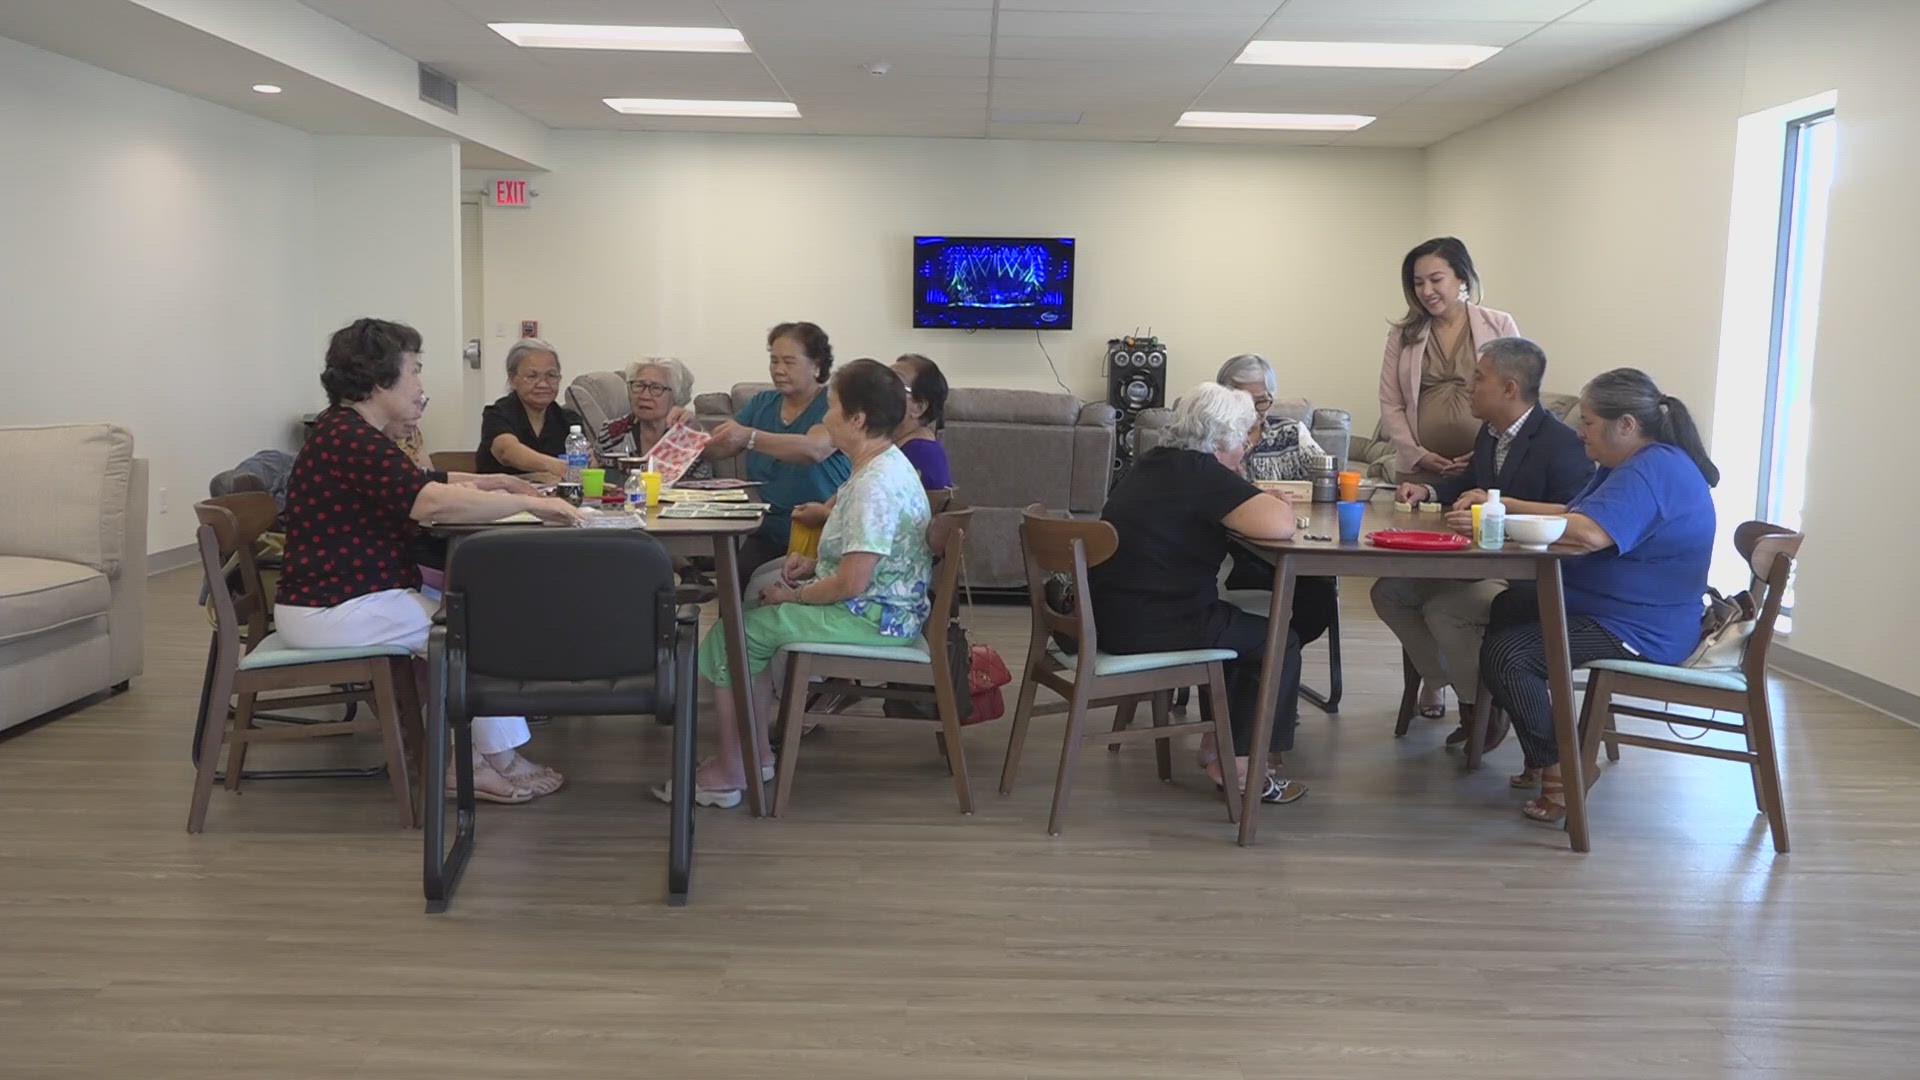 United At Home is an adult day care center catering to seniors of Vietnamese descent. Many clients are refugees and immigrants who also benefit from language help.